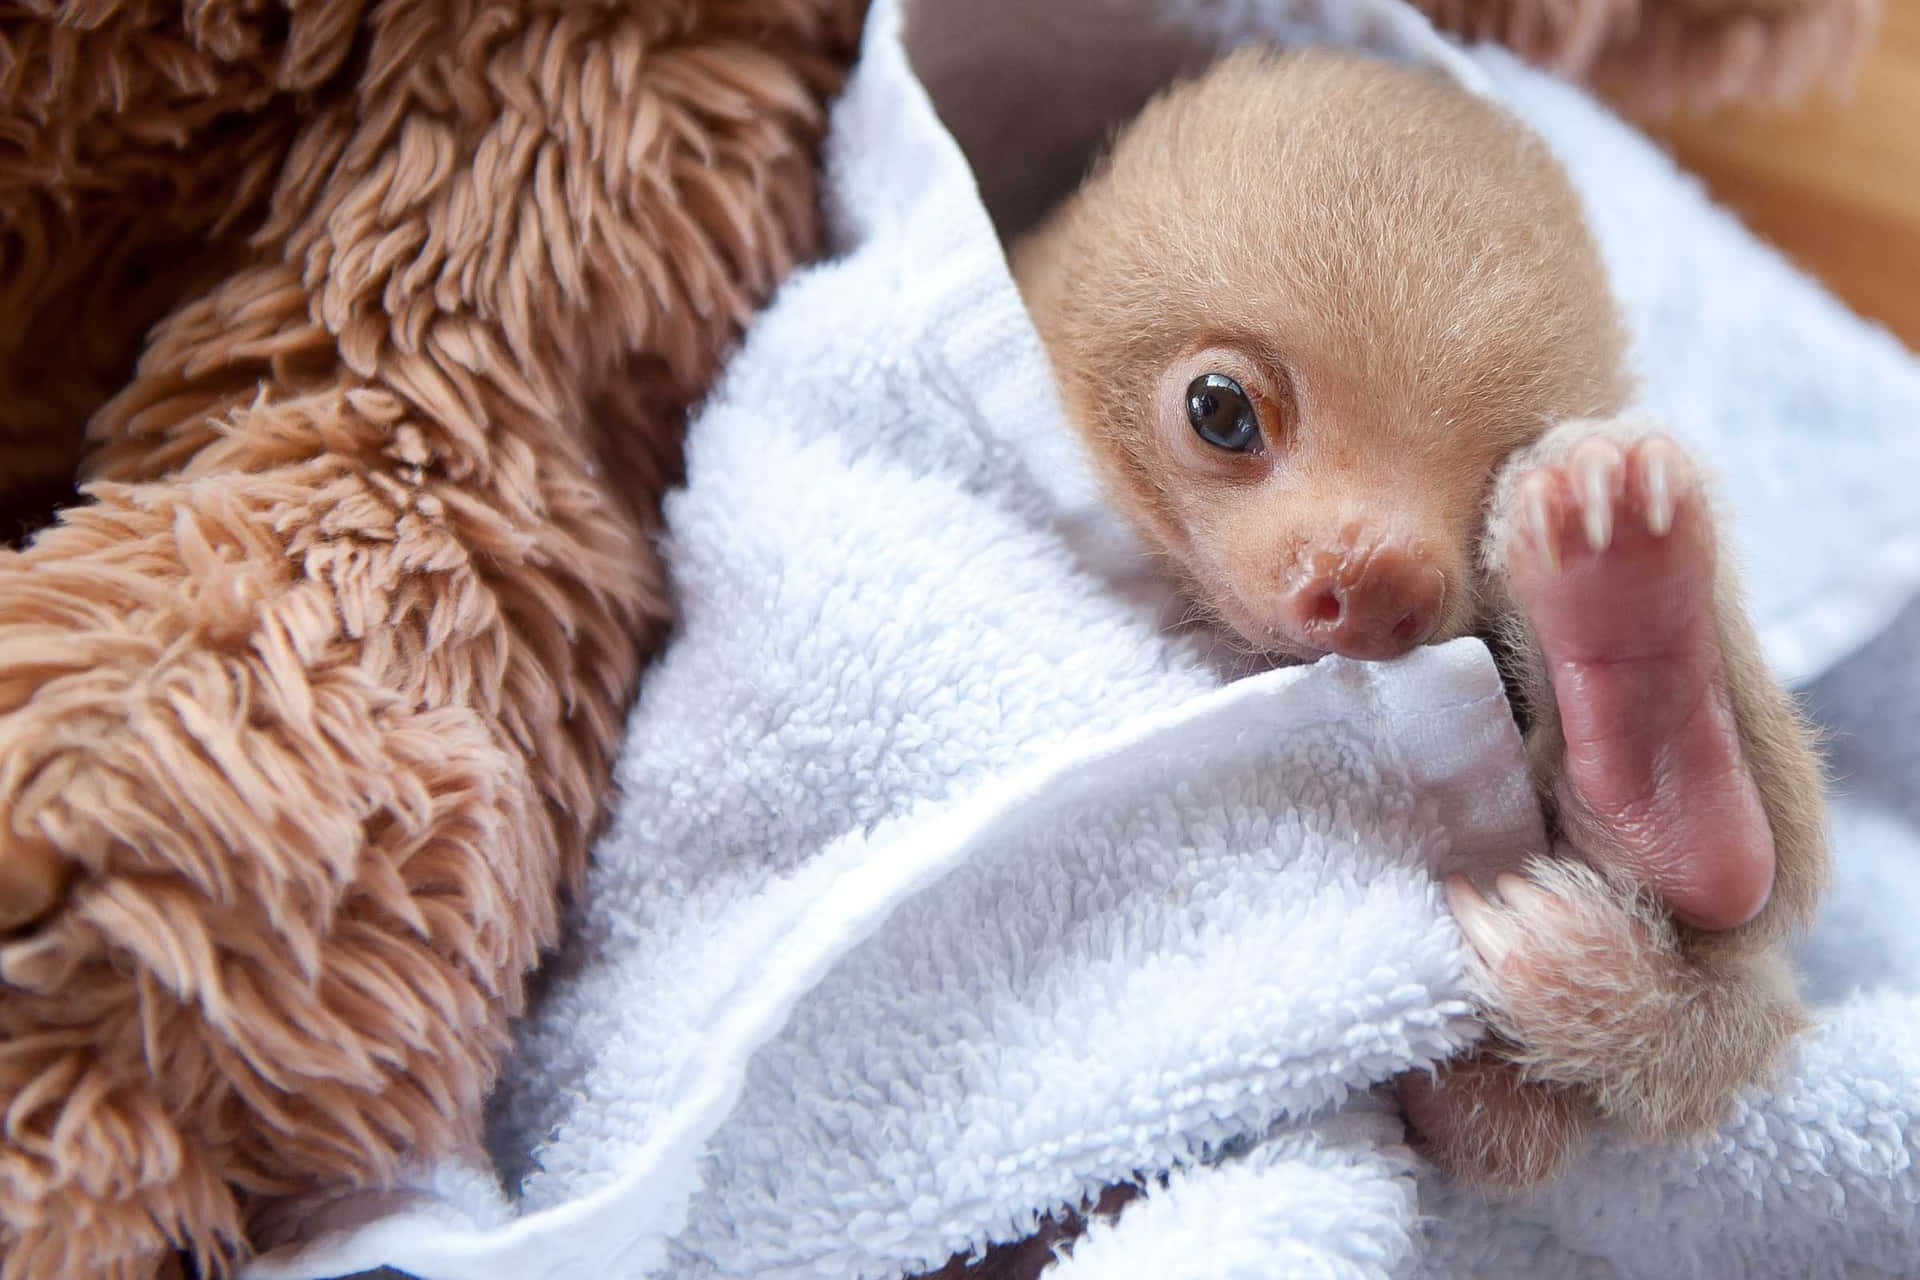 Cuteness Overload! Adorable Baby Sloth